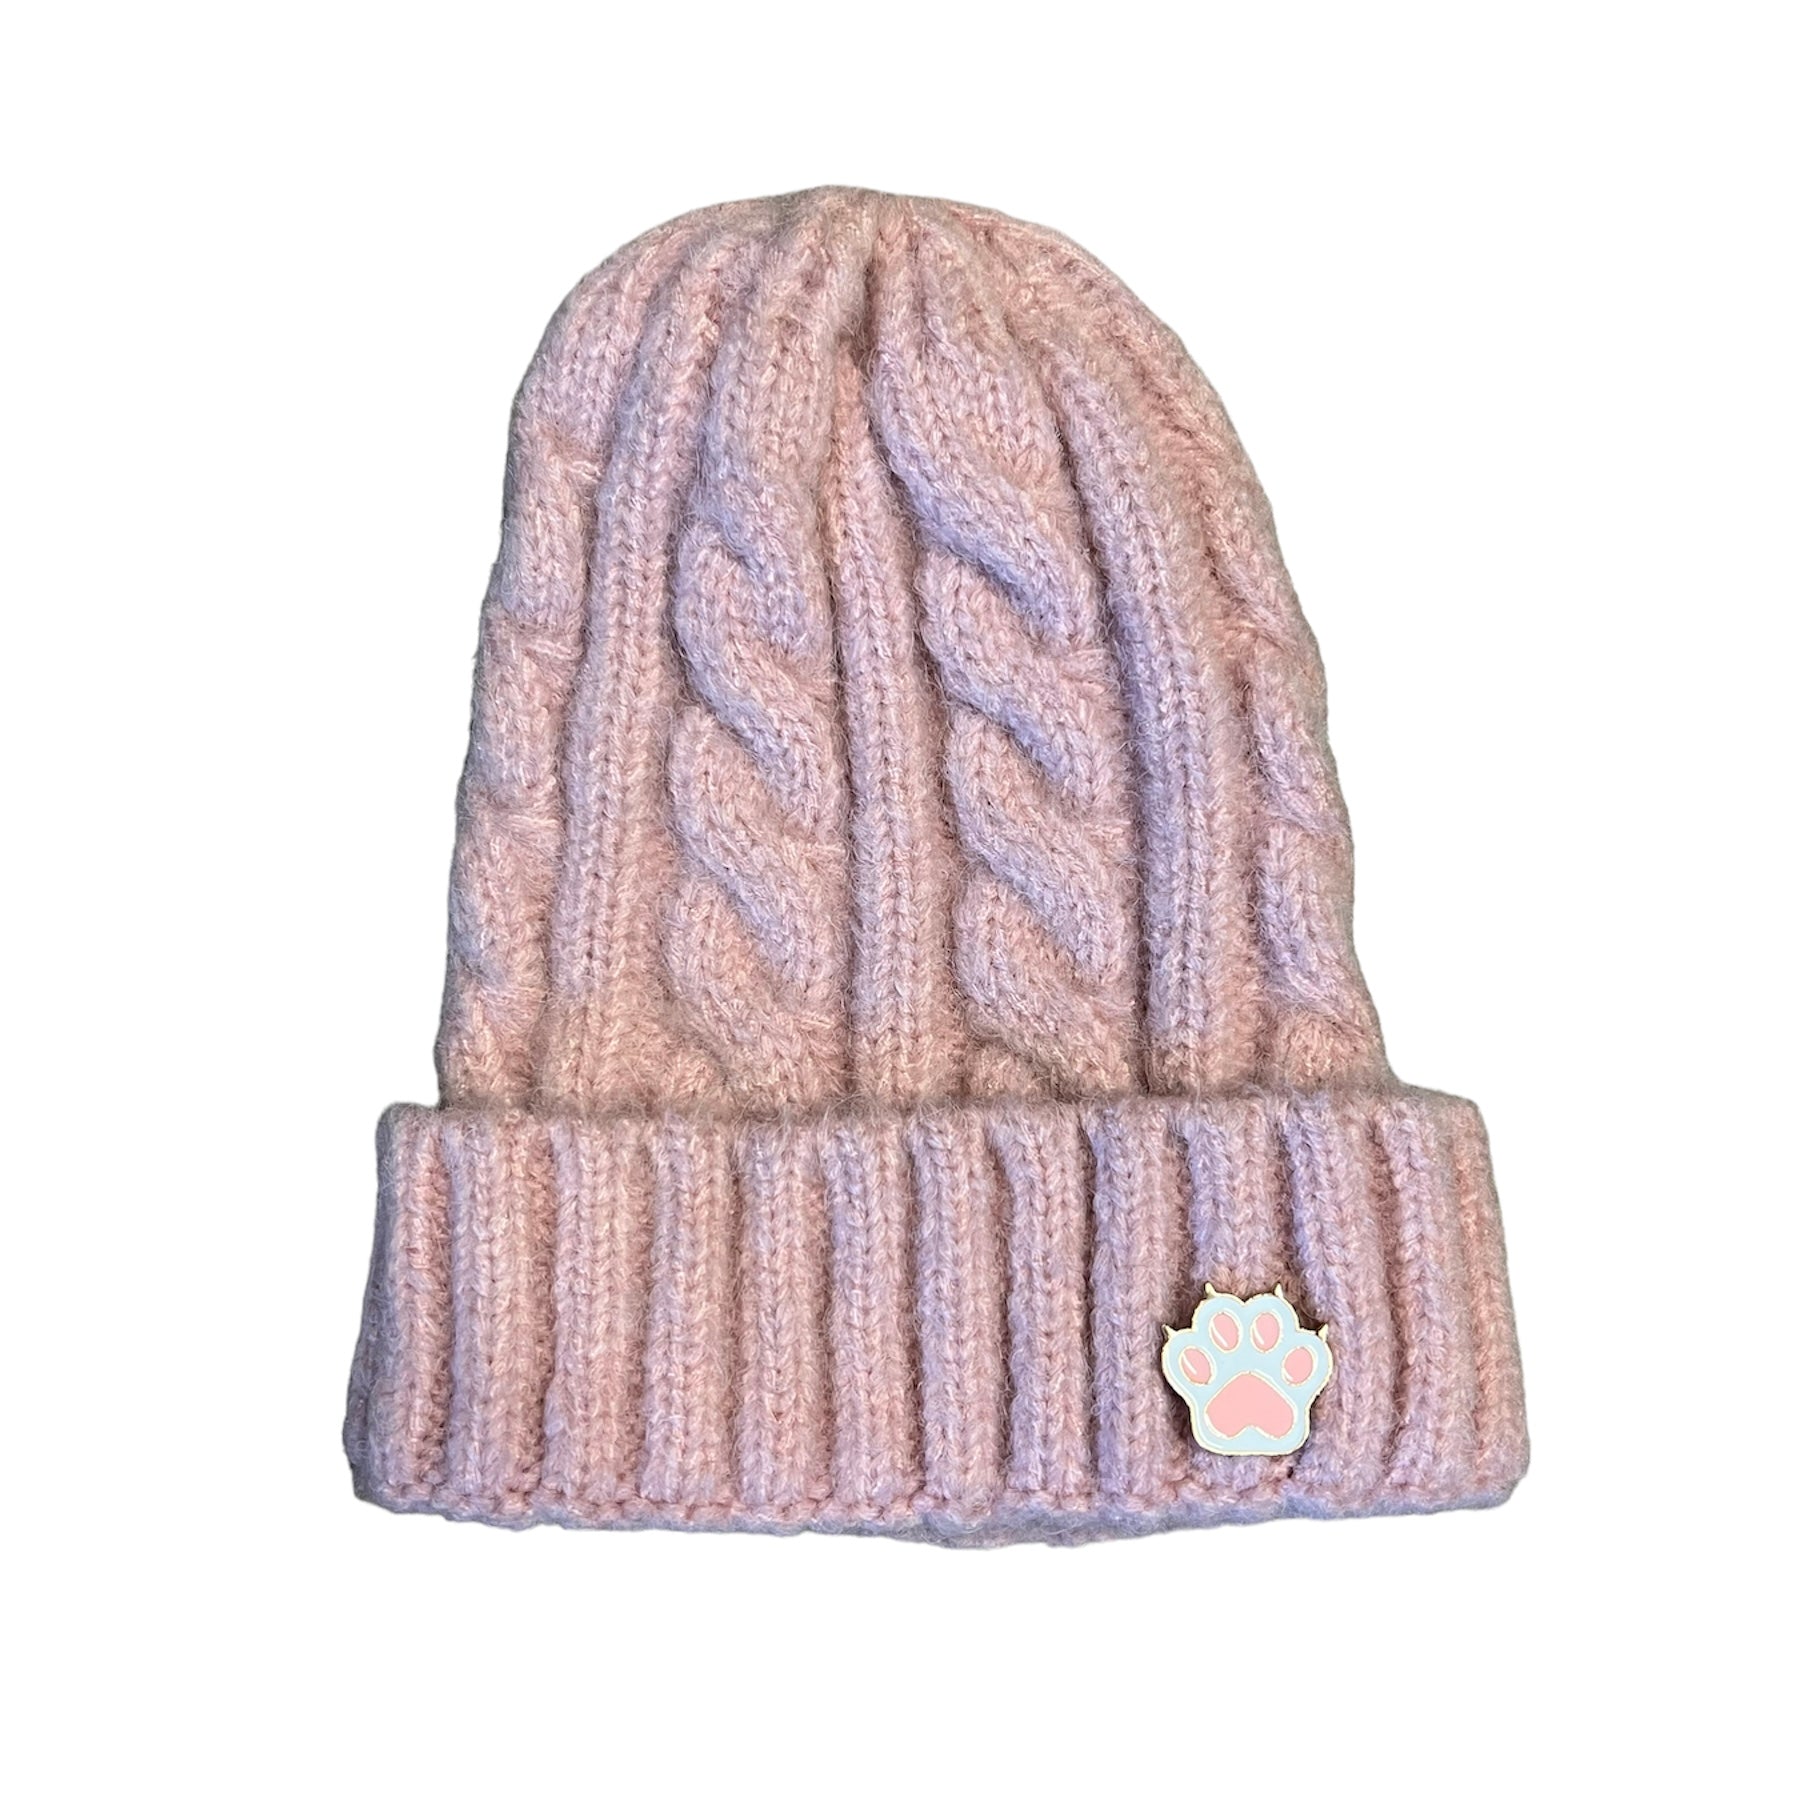 Wool Bennie Hat with a Cute Paw Pin Pink